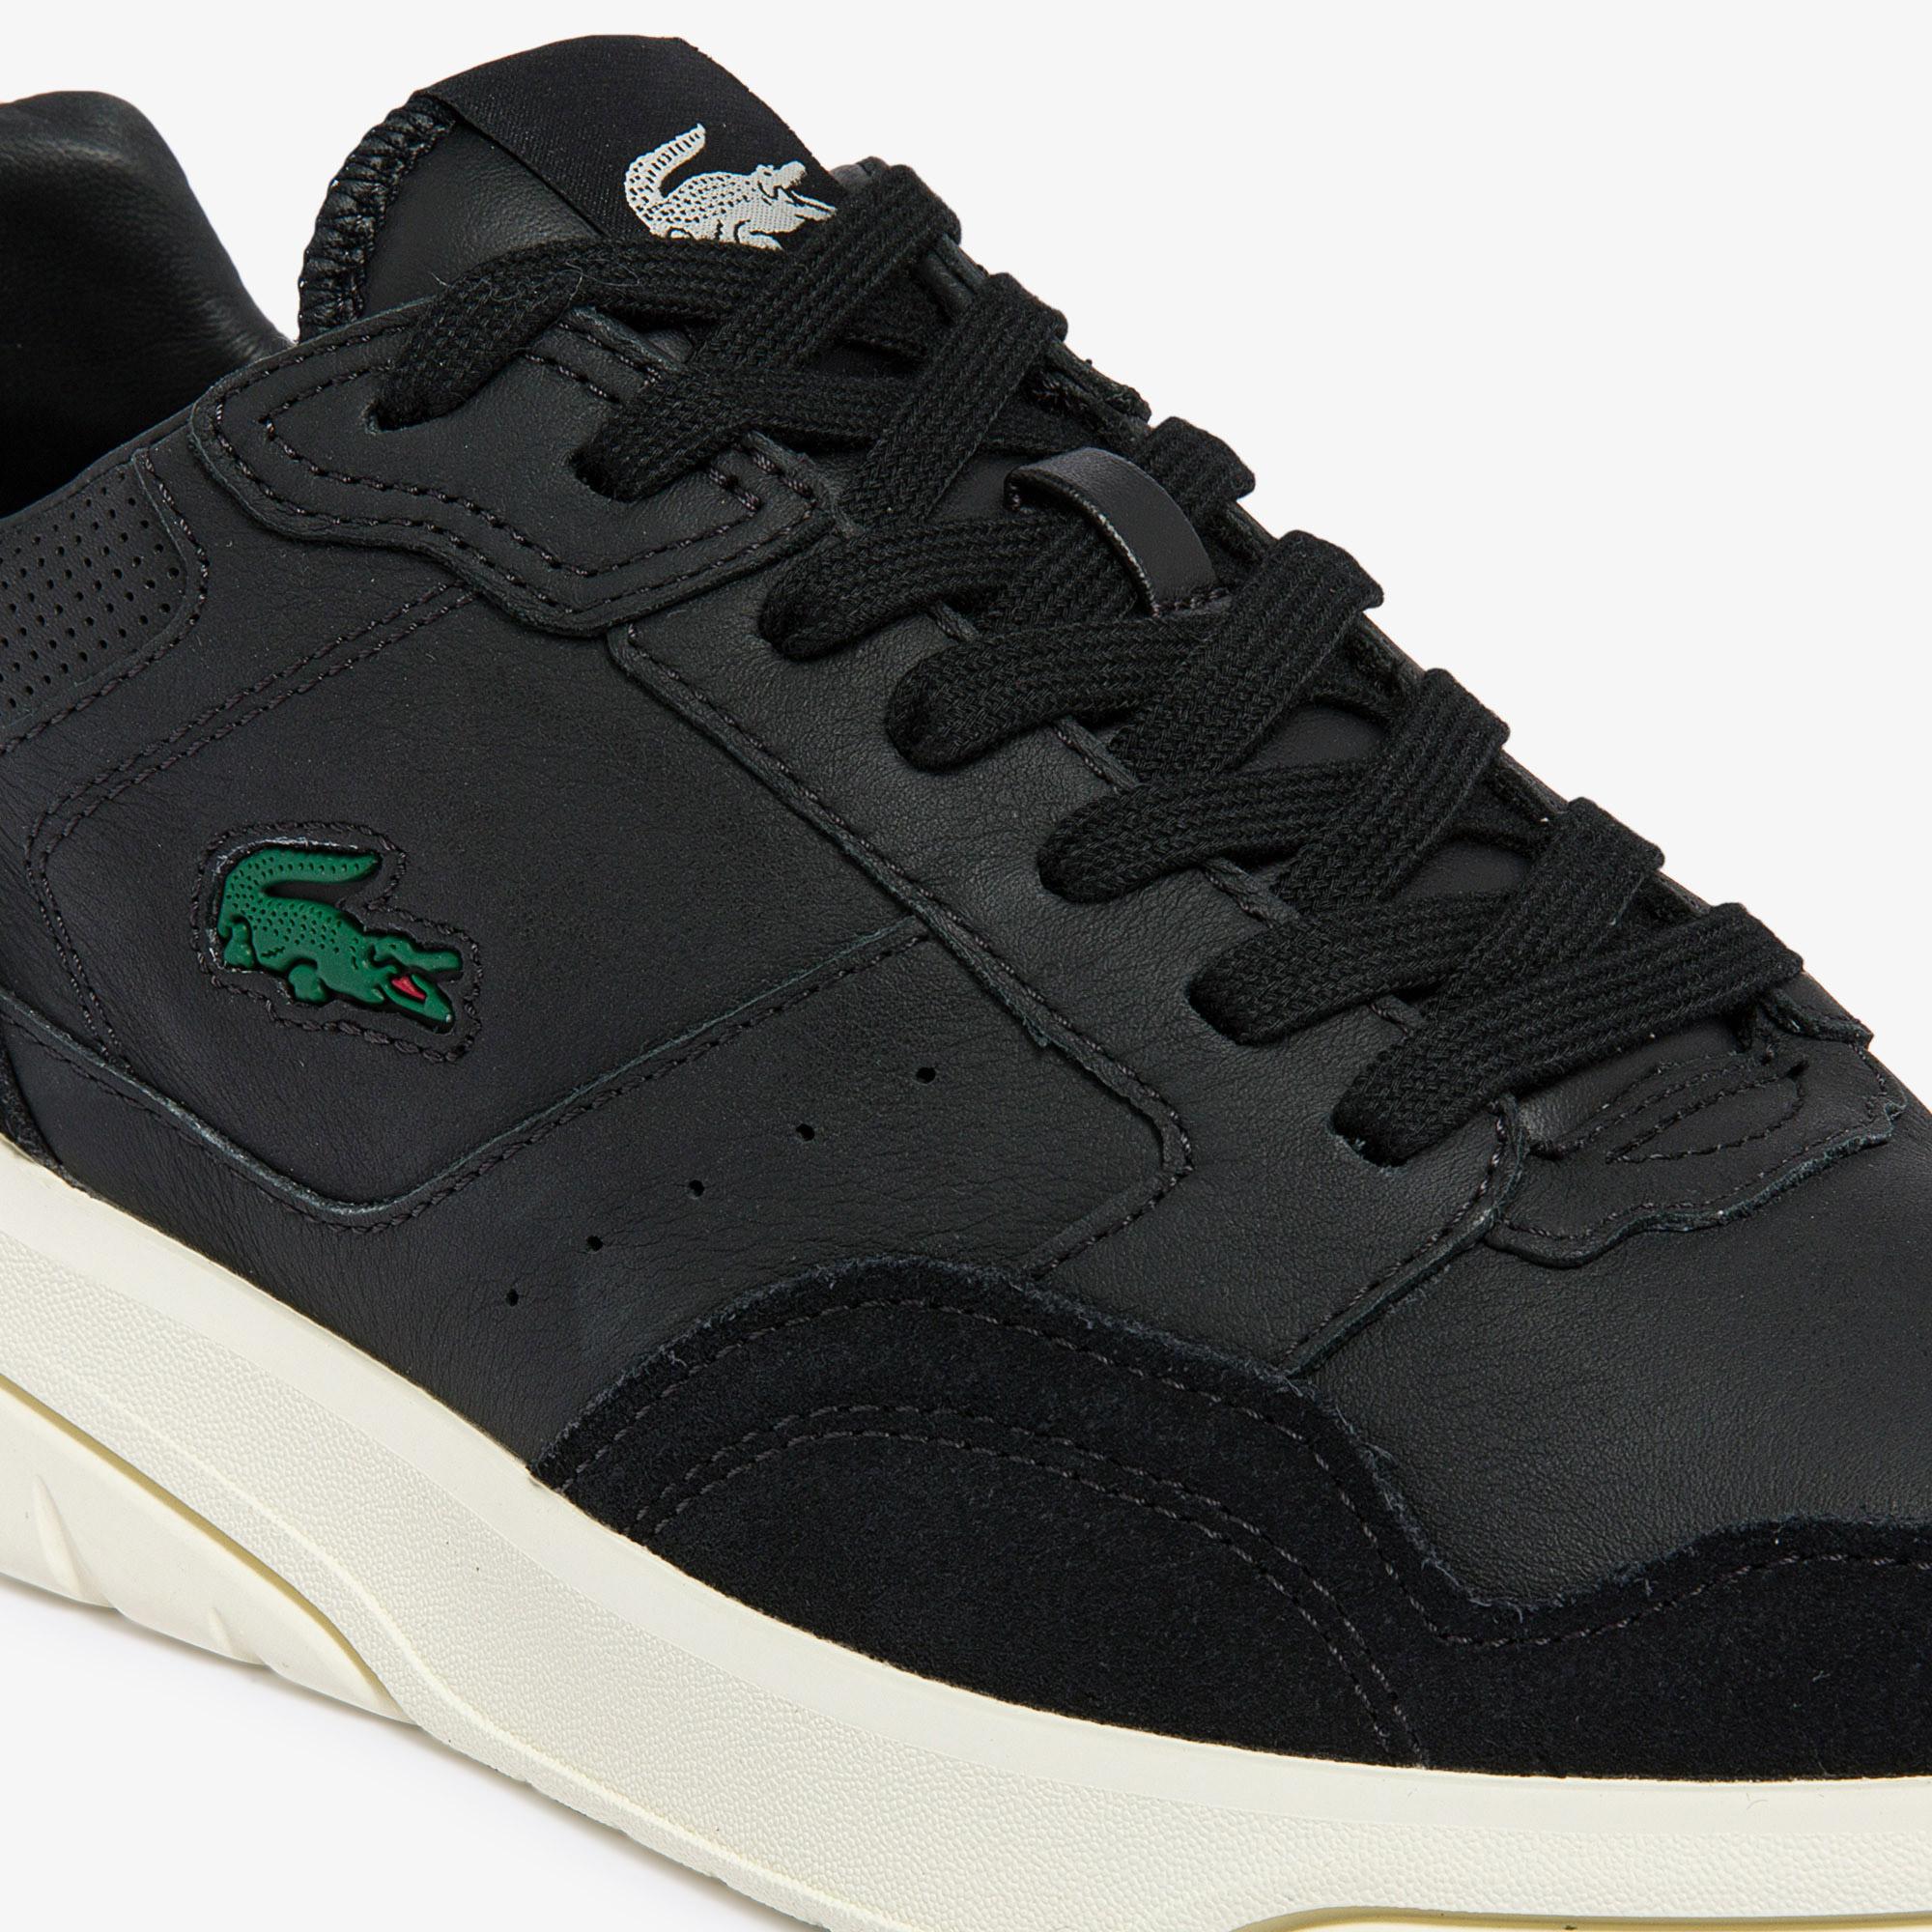 Lacoste Men's Game Advance Sneakers. 7